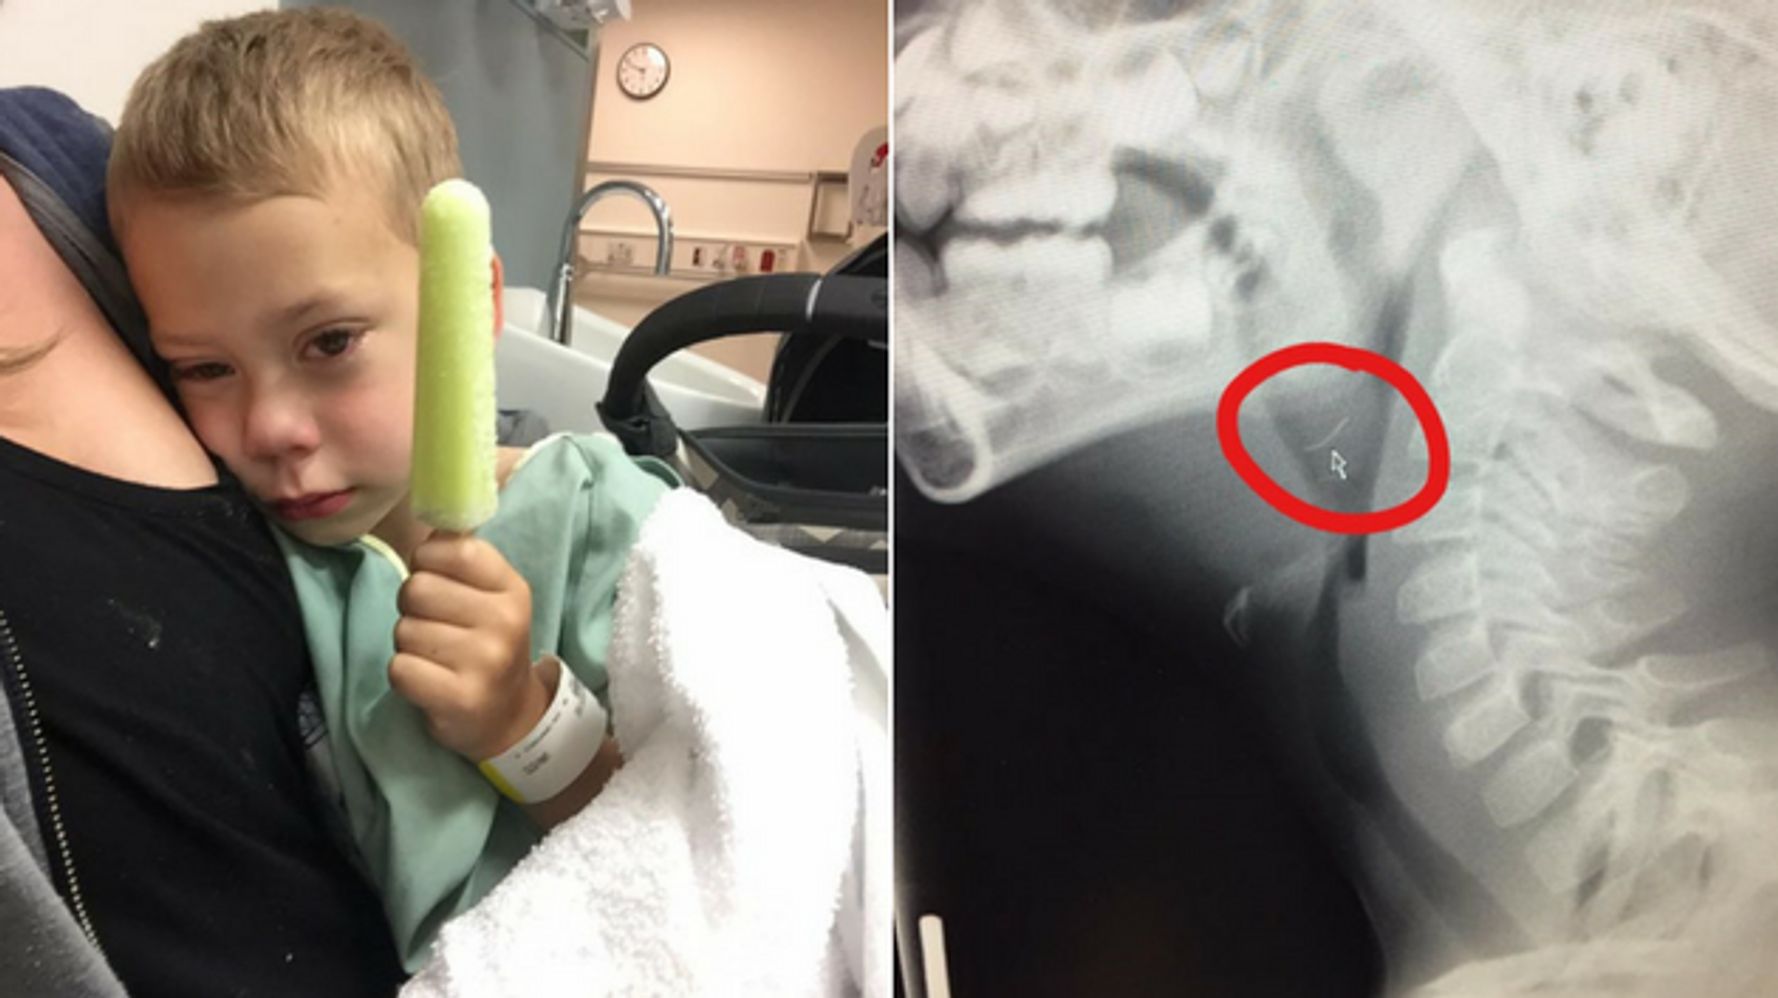 Wire from grill brush gets lodged in child's throat